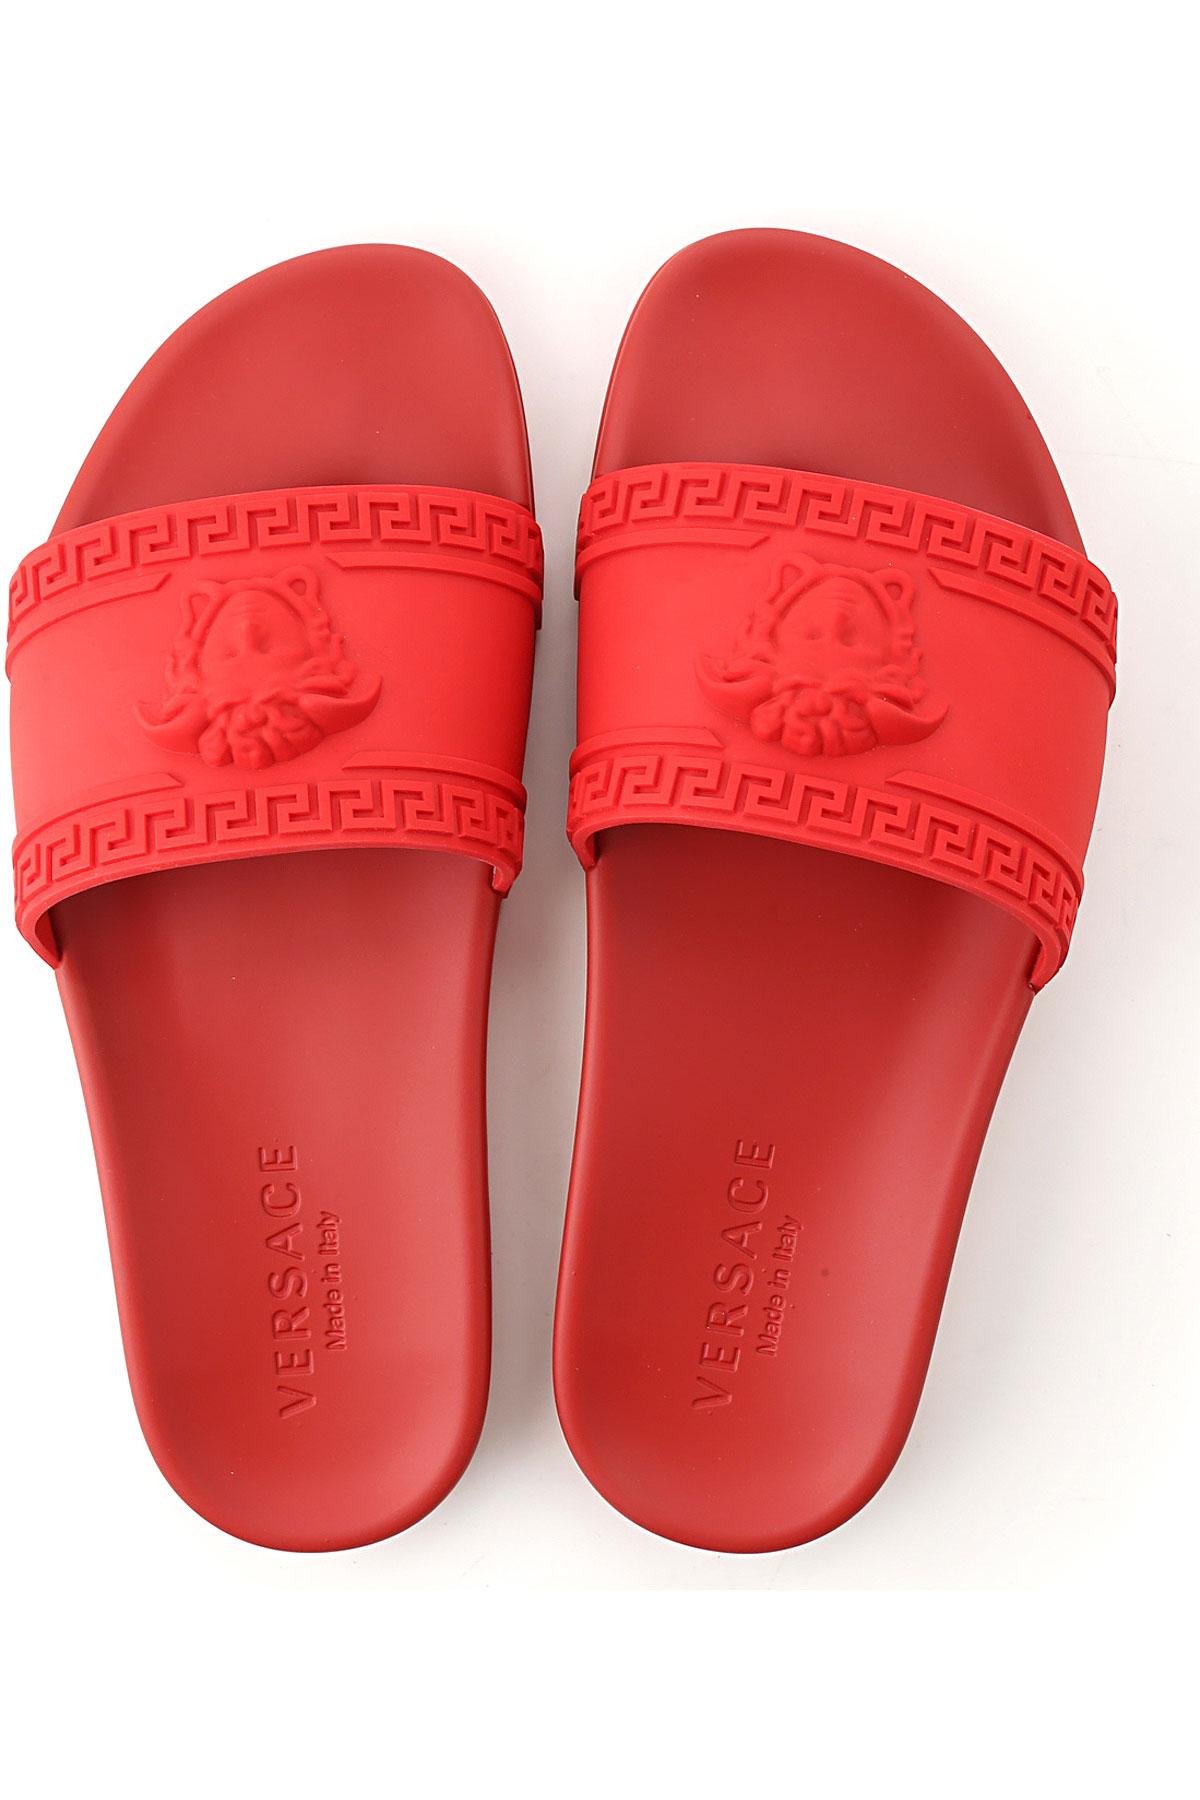 versace slippers red